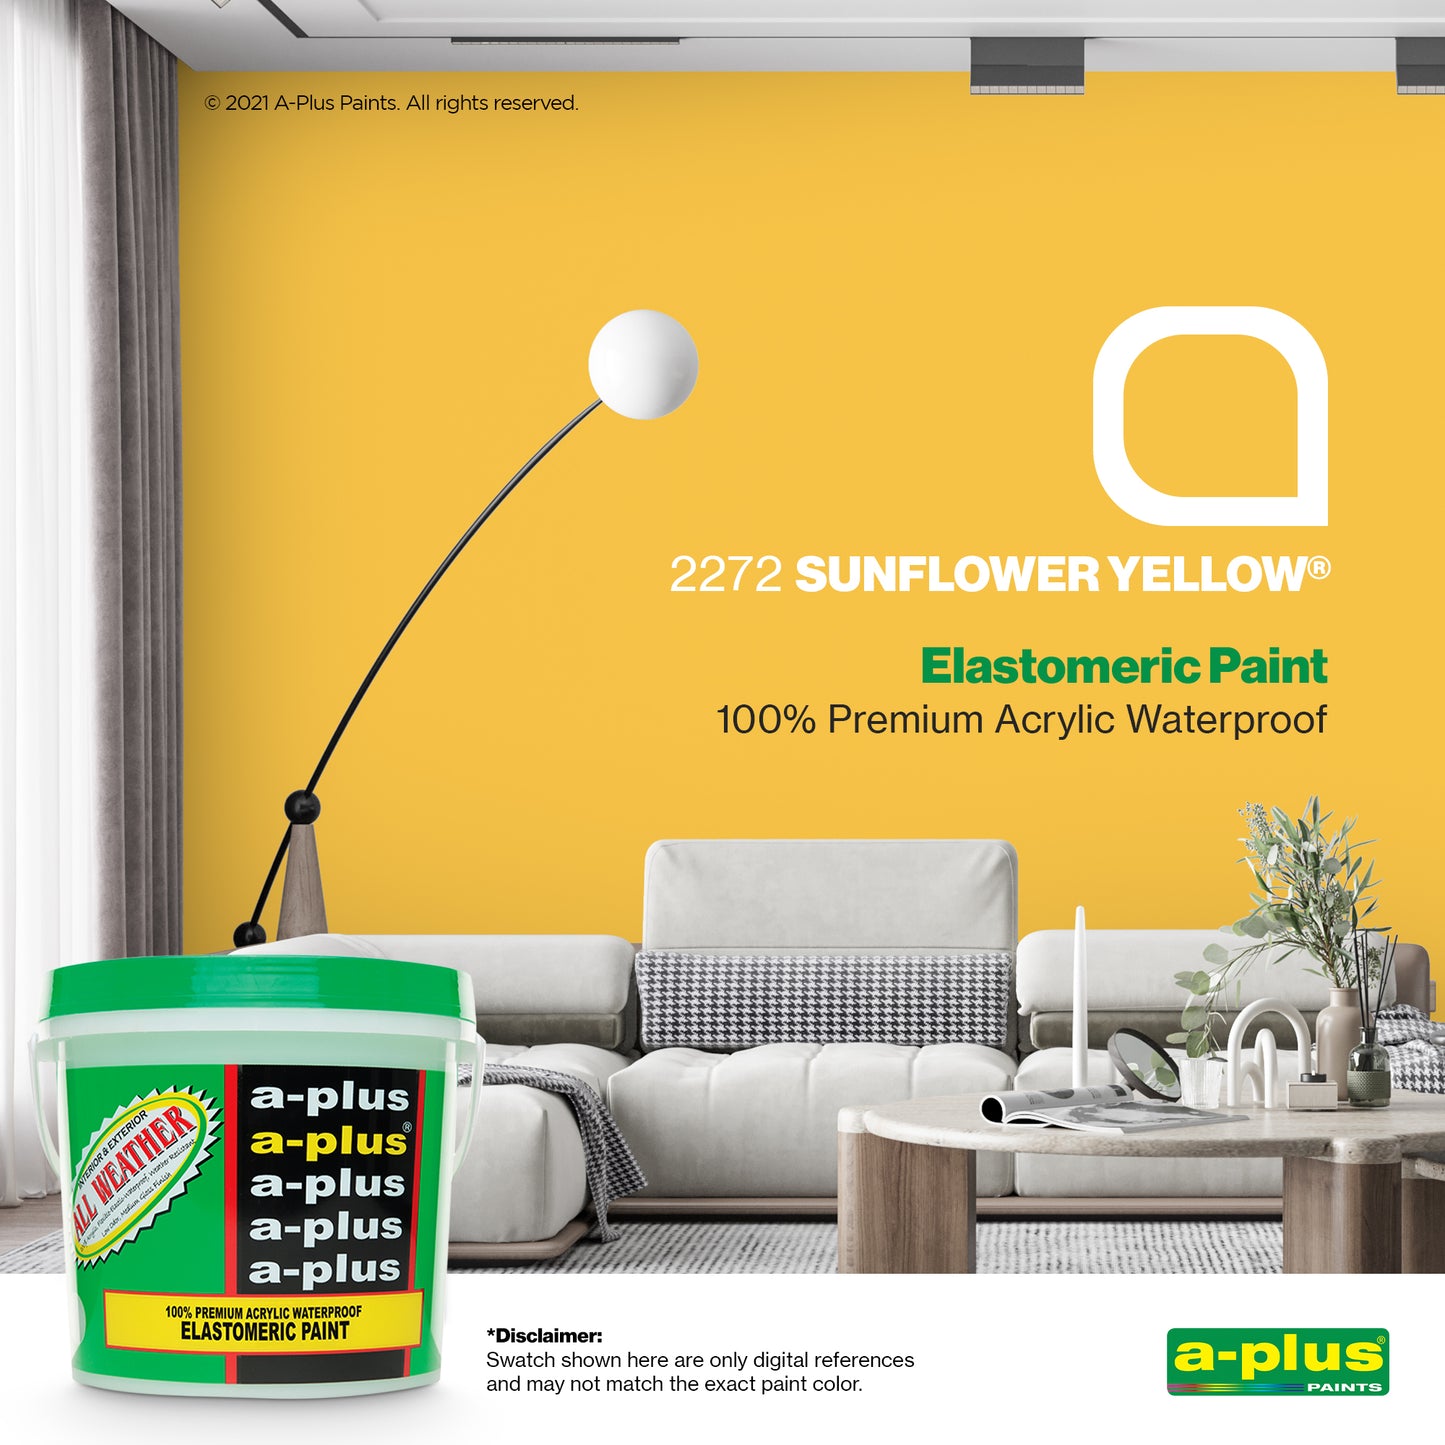 A-Plus All Weather® 2272 Sunflower Yellow Elastomeric Paint